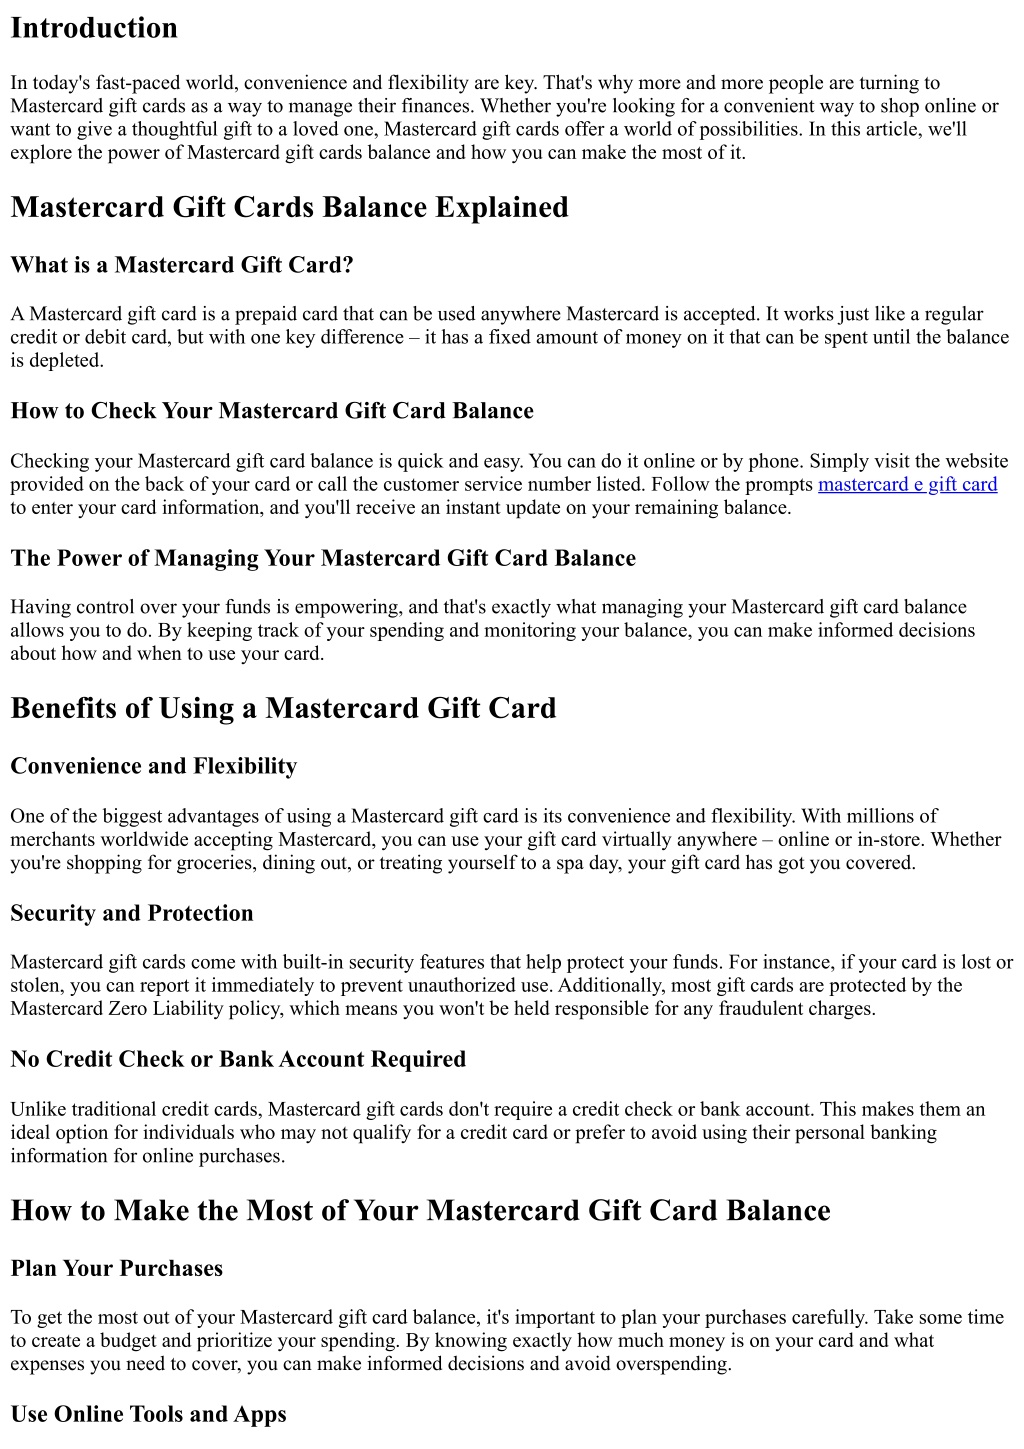 How do I determine the remaining balance on a gift card or e-gift card?